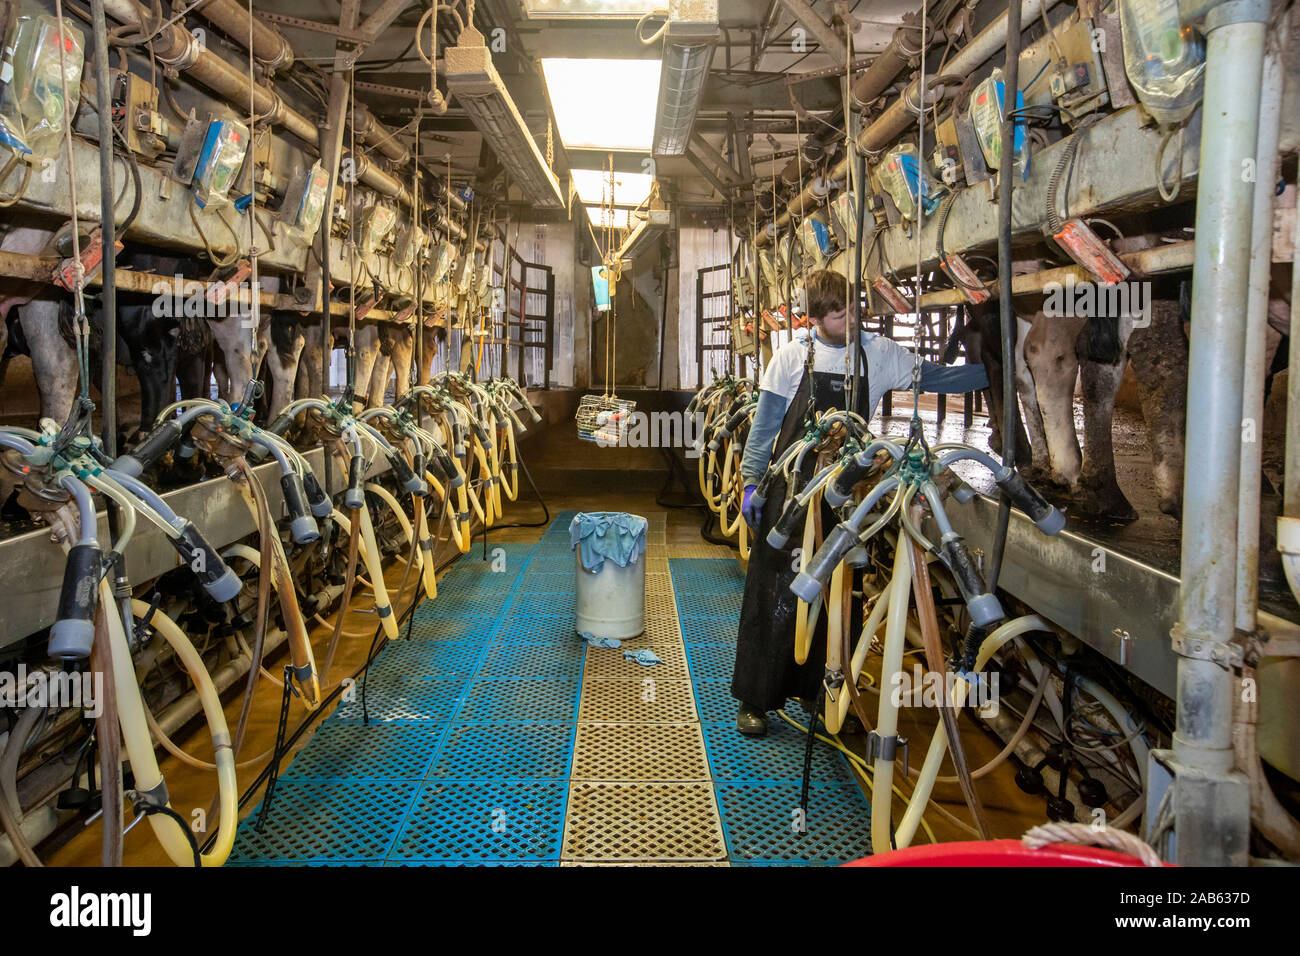 Beatrice, Nebraska - A young man milks cows in the milking parlor of a dairy farm. Stock Photo